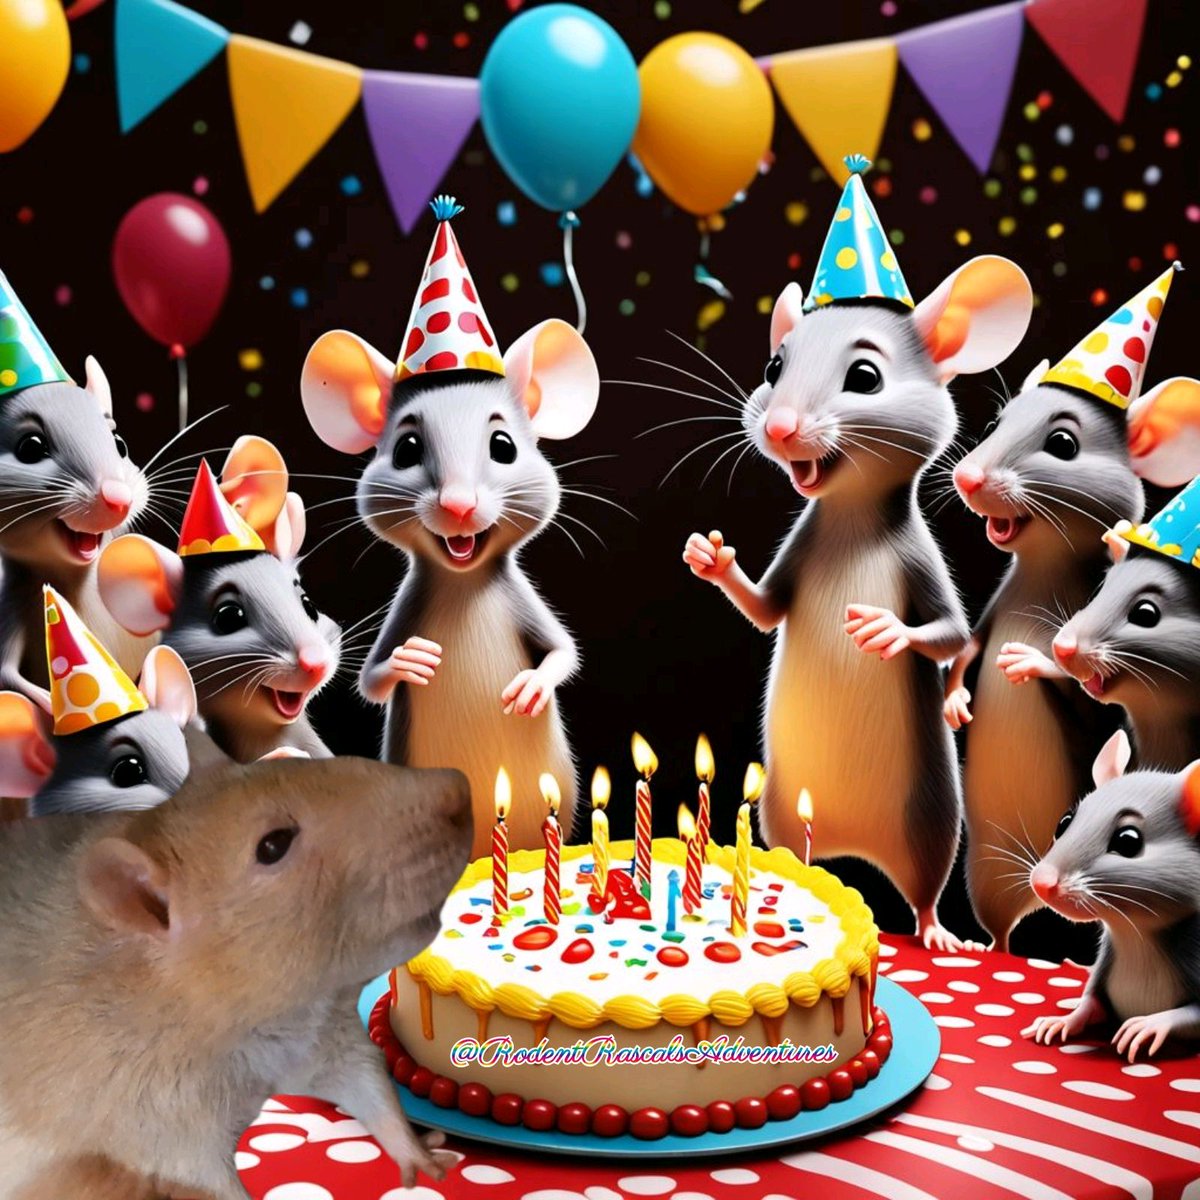 🆕️🎉🐁🎂 #CelebrationTime It's time to #honor & #celebrate our sweet Mr. HoneyBun for his 2nd Birth/GOTCHA DAY!! Join the party on our YouTube Channel now!! NEW ADVENTURES POSTING... #TGIF #fancyrat #petrat #petrats #ratlover #HappyBirthday
❤️🐹🐽🐀💻⬇️
#RodentRascalsAdventures